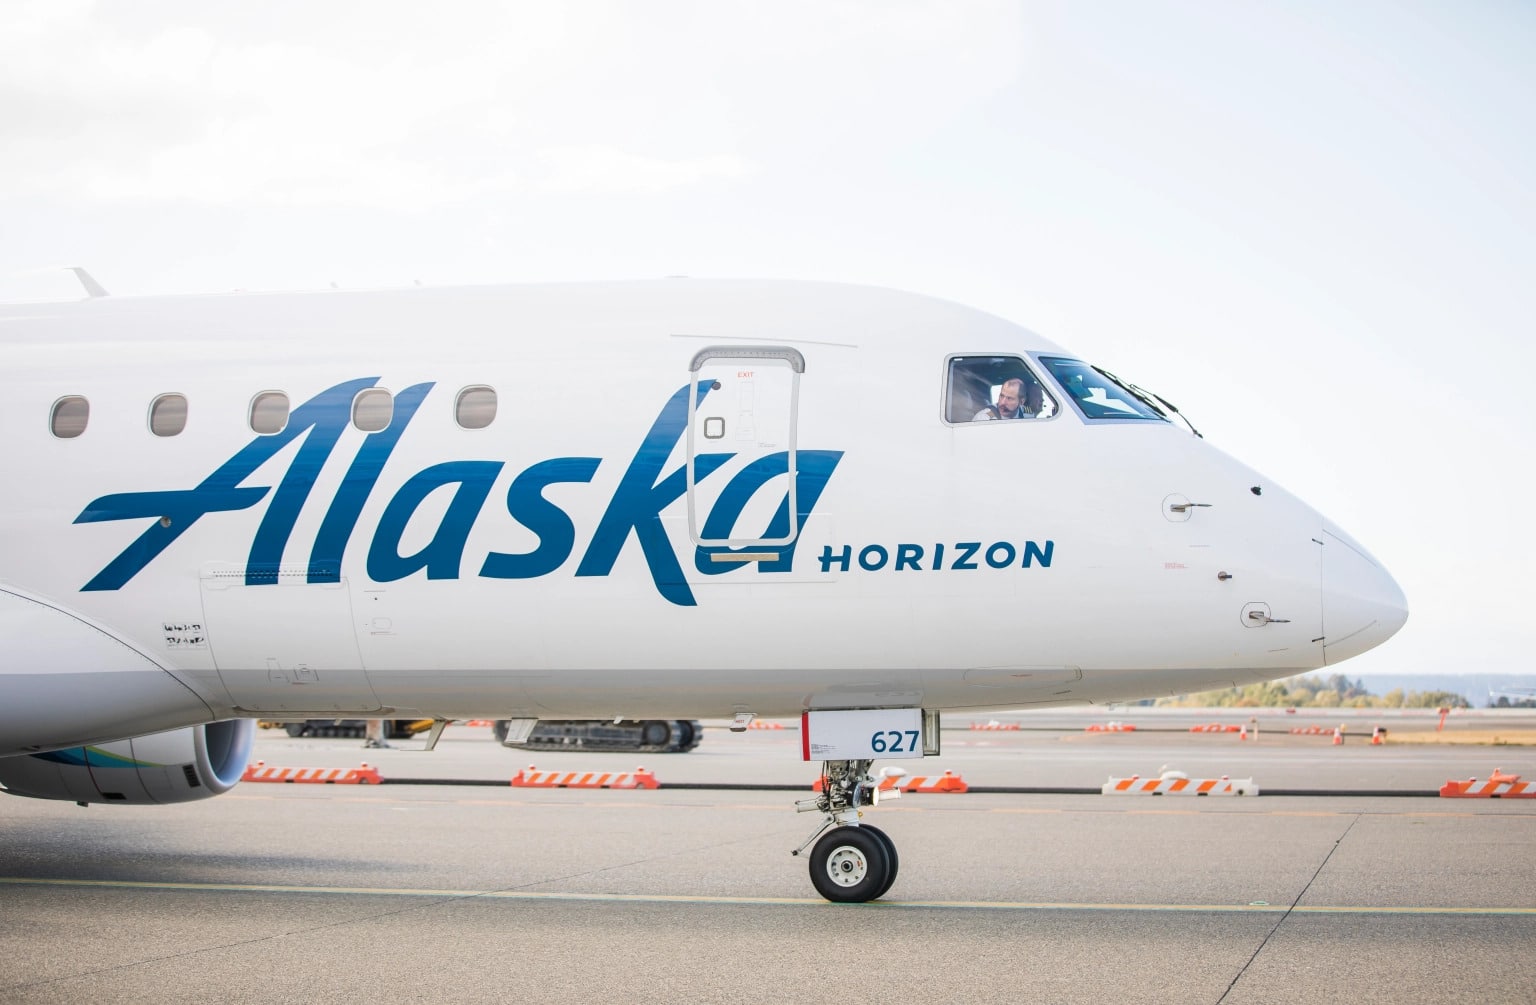 Twelve Lands Microsoft and Alaska Airlines as Partners to Produce Jet Fuel